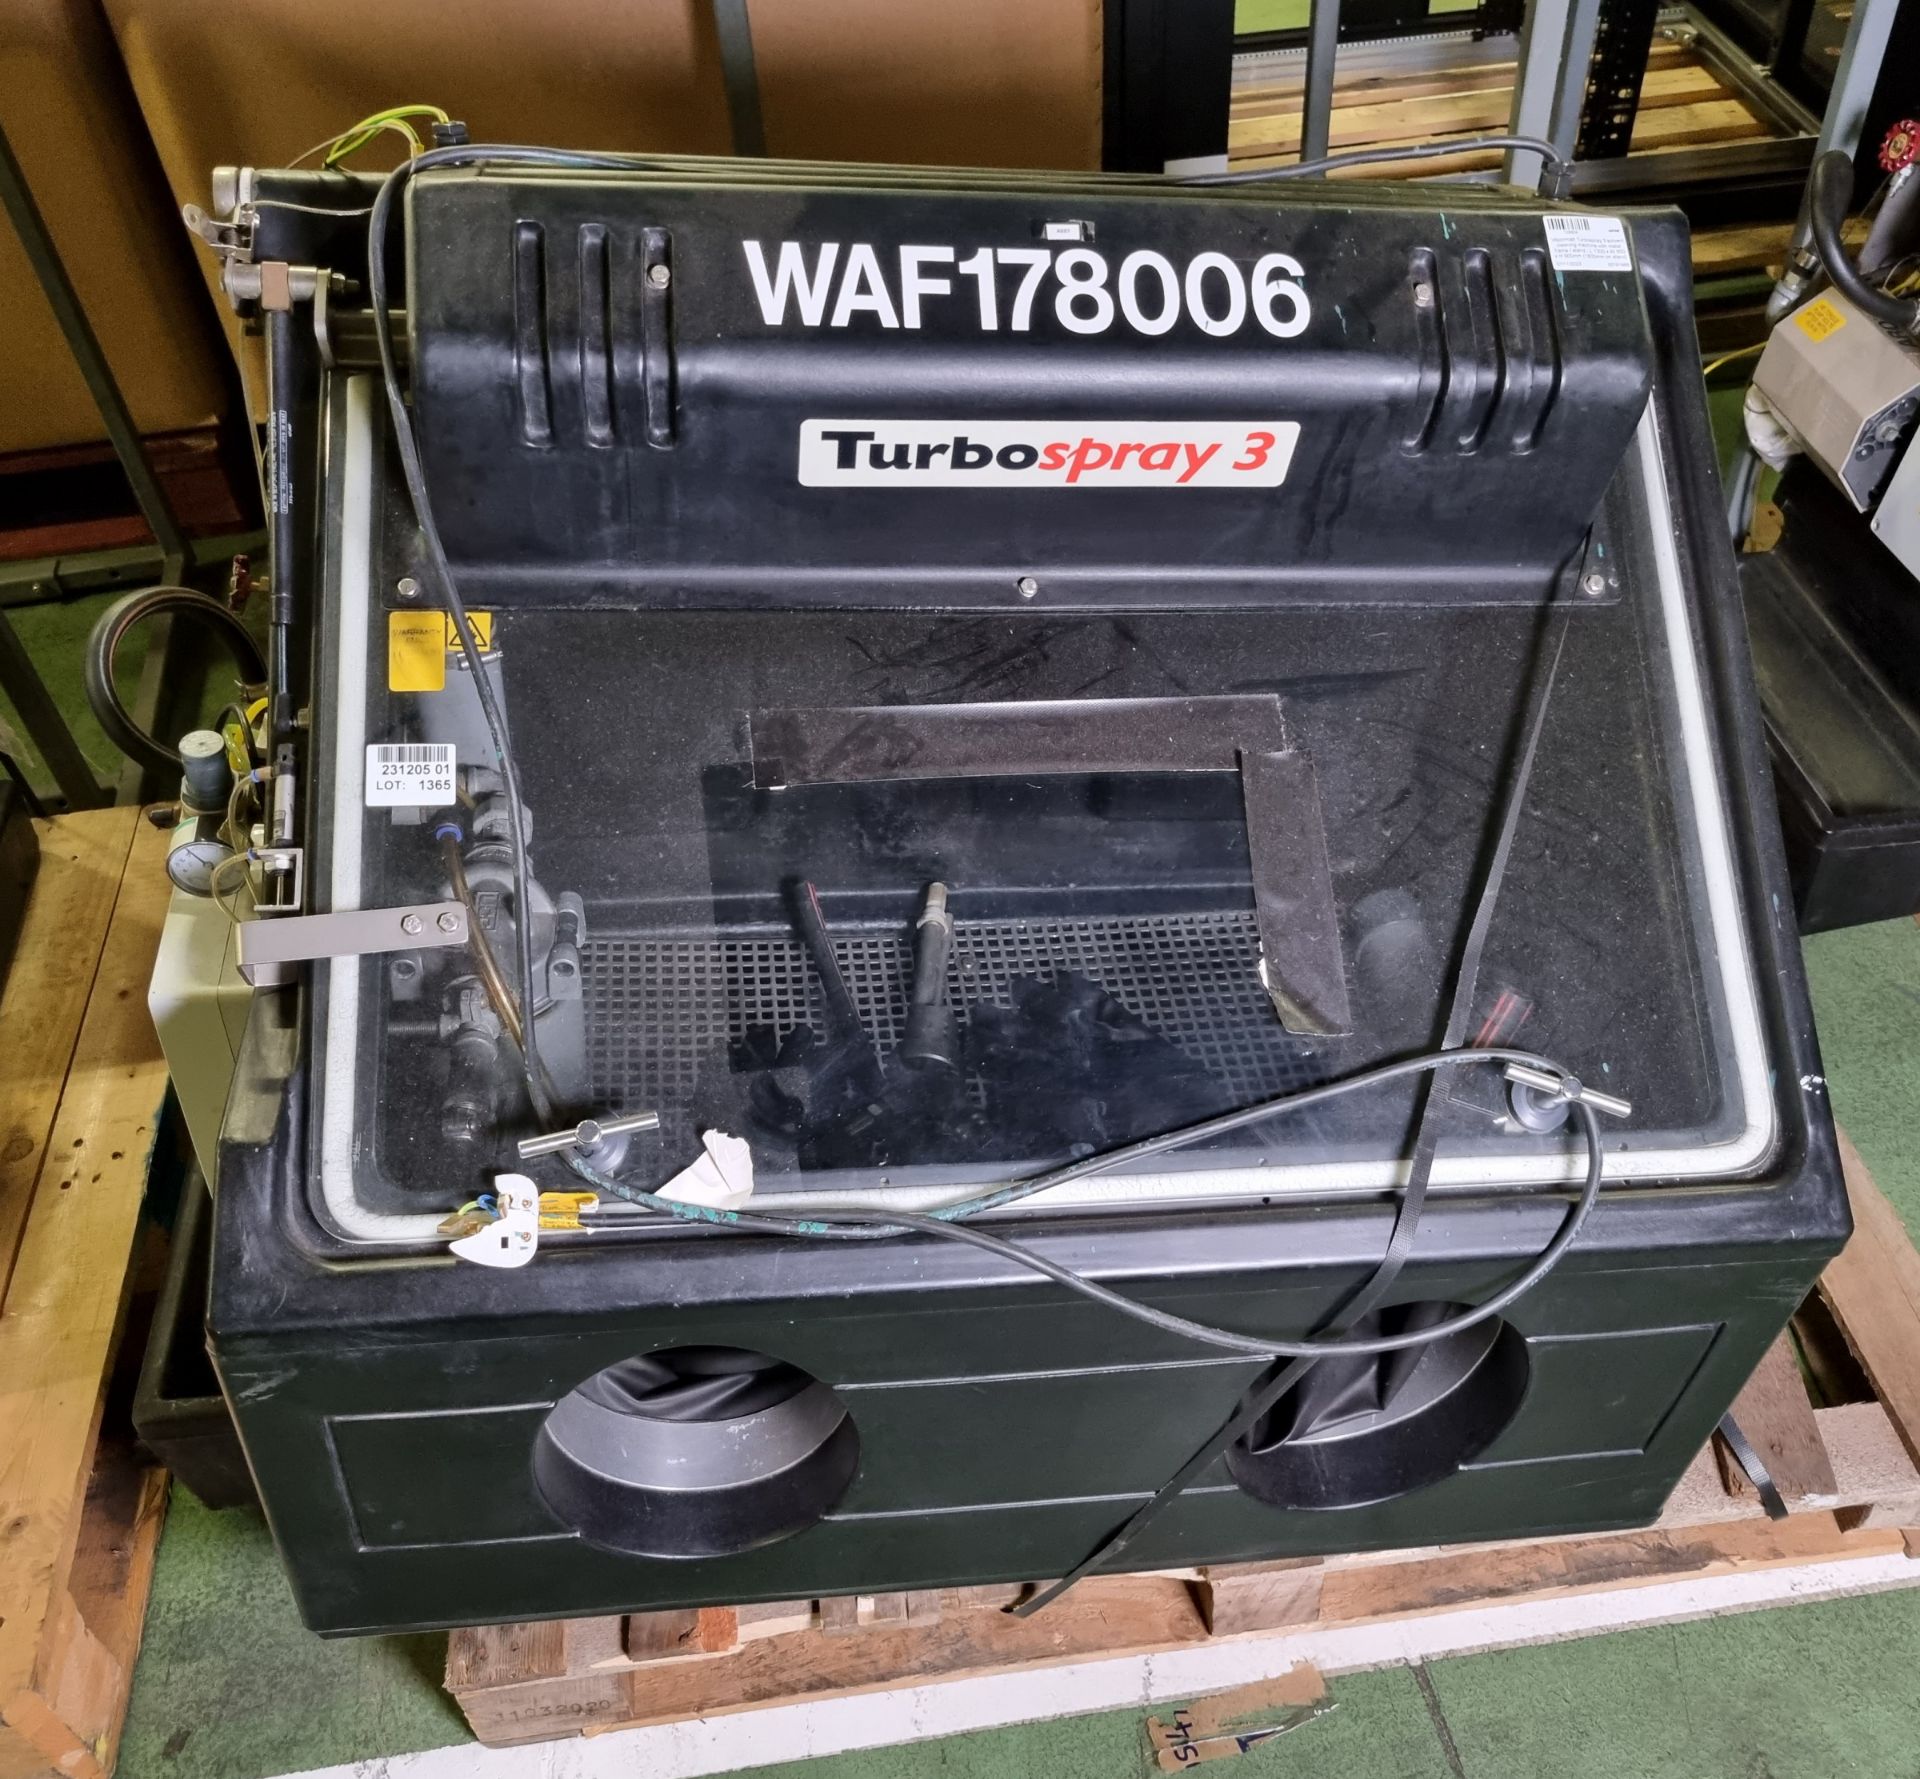 Vapormatt Turbospray 3 solvent cleaning machine with metal frame / stand - L 1300 x W 850 x H 900mm - Image 2 of 7